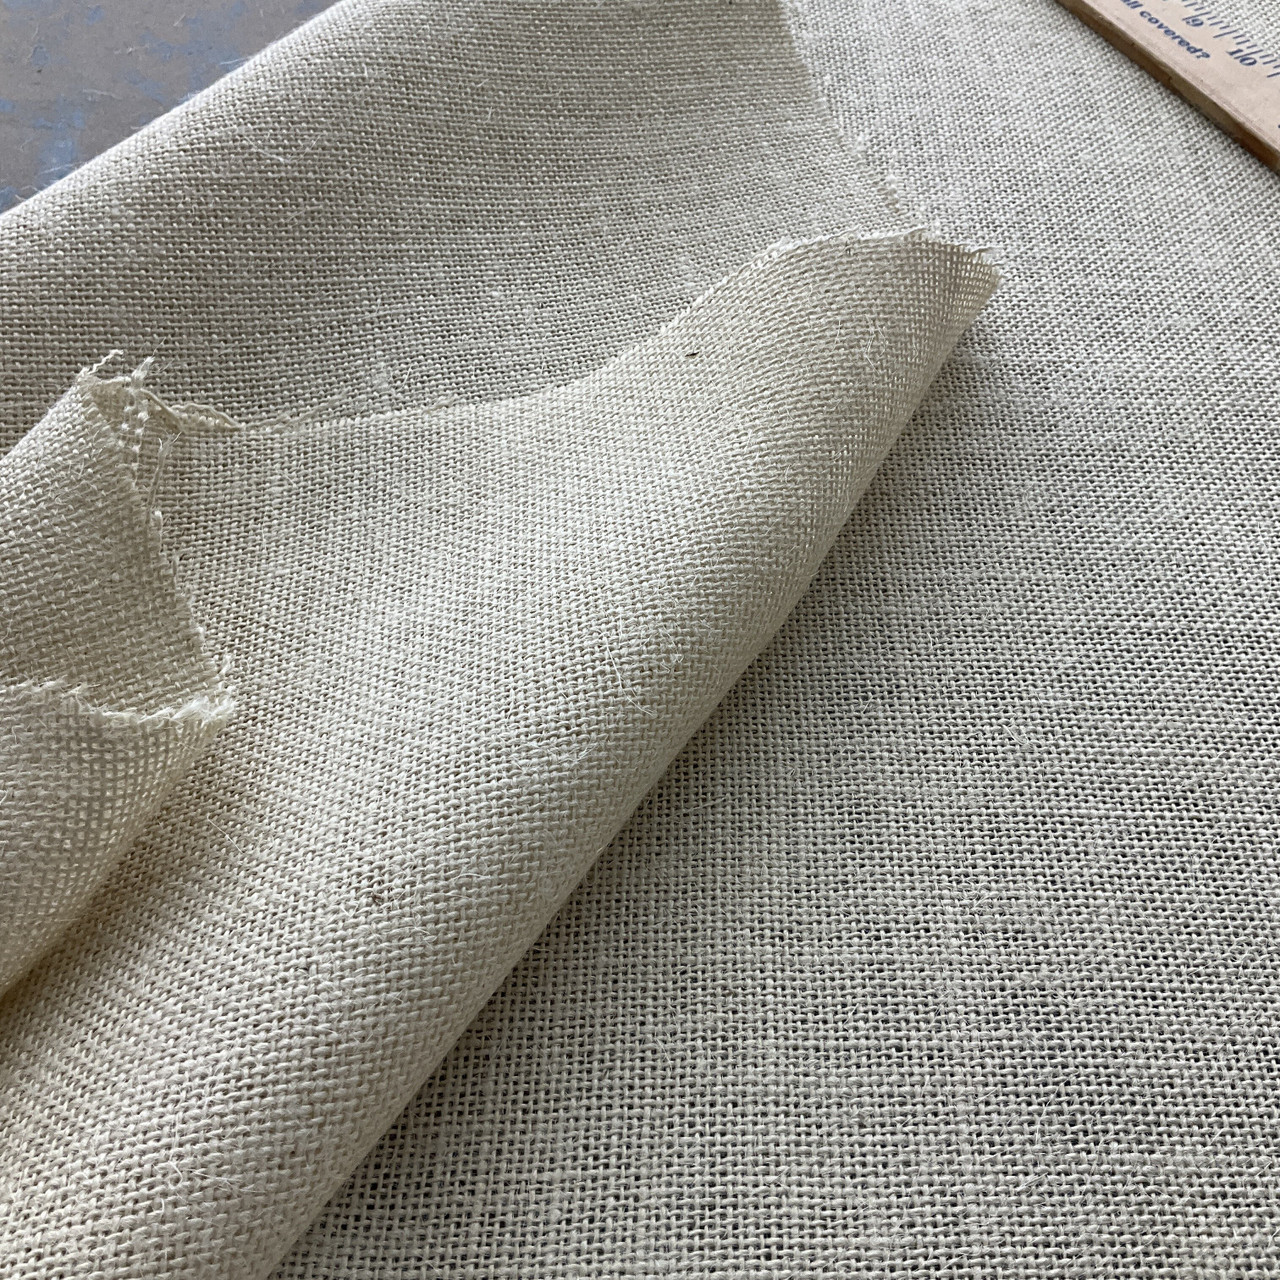 Heavy Upholstery Weight Jute Burlap By The Yard - Fabric Farms